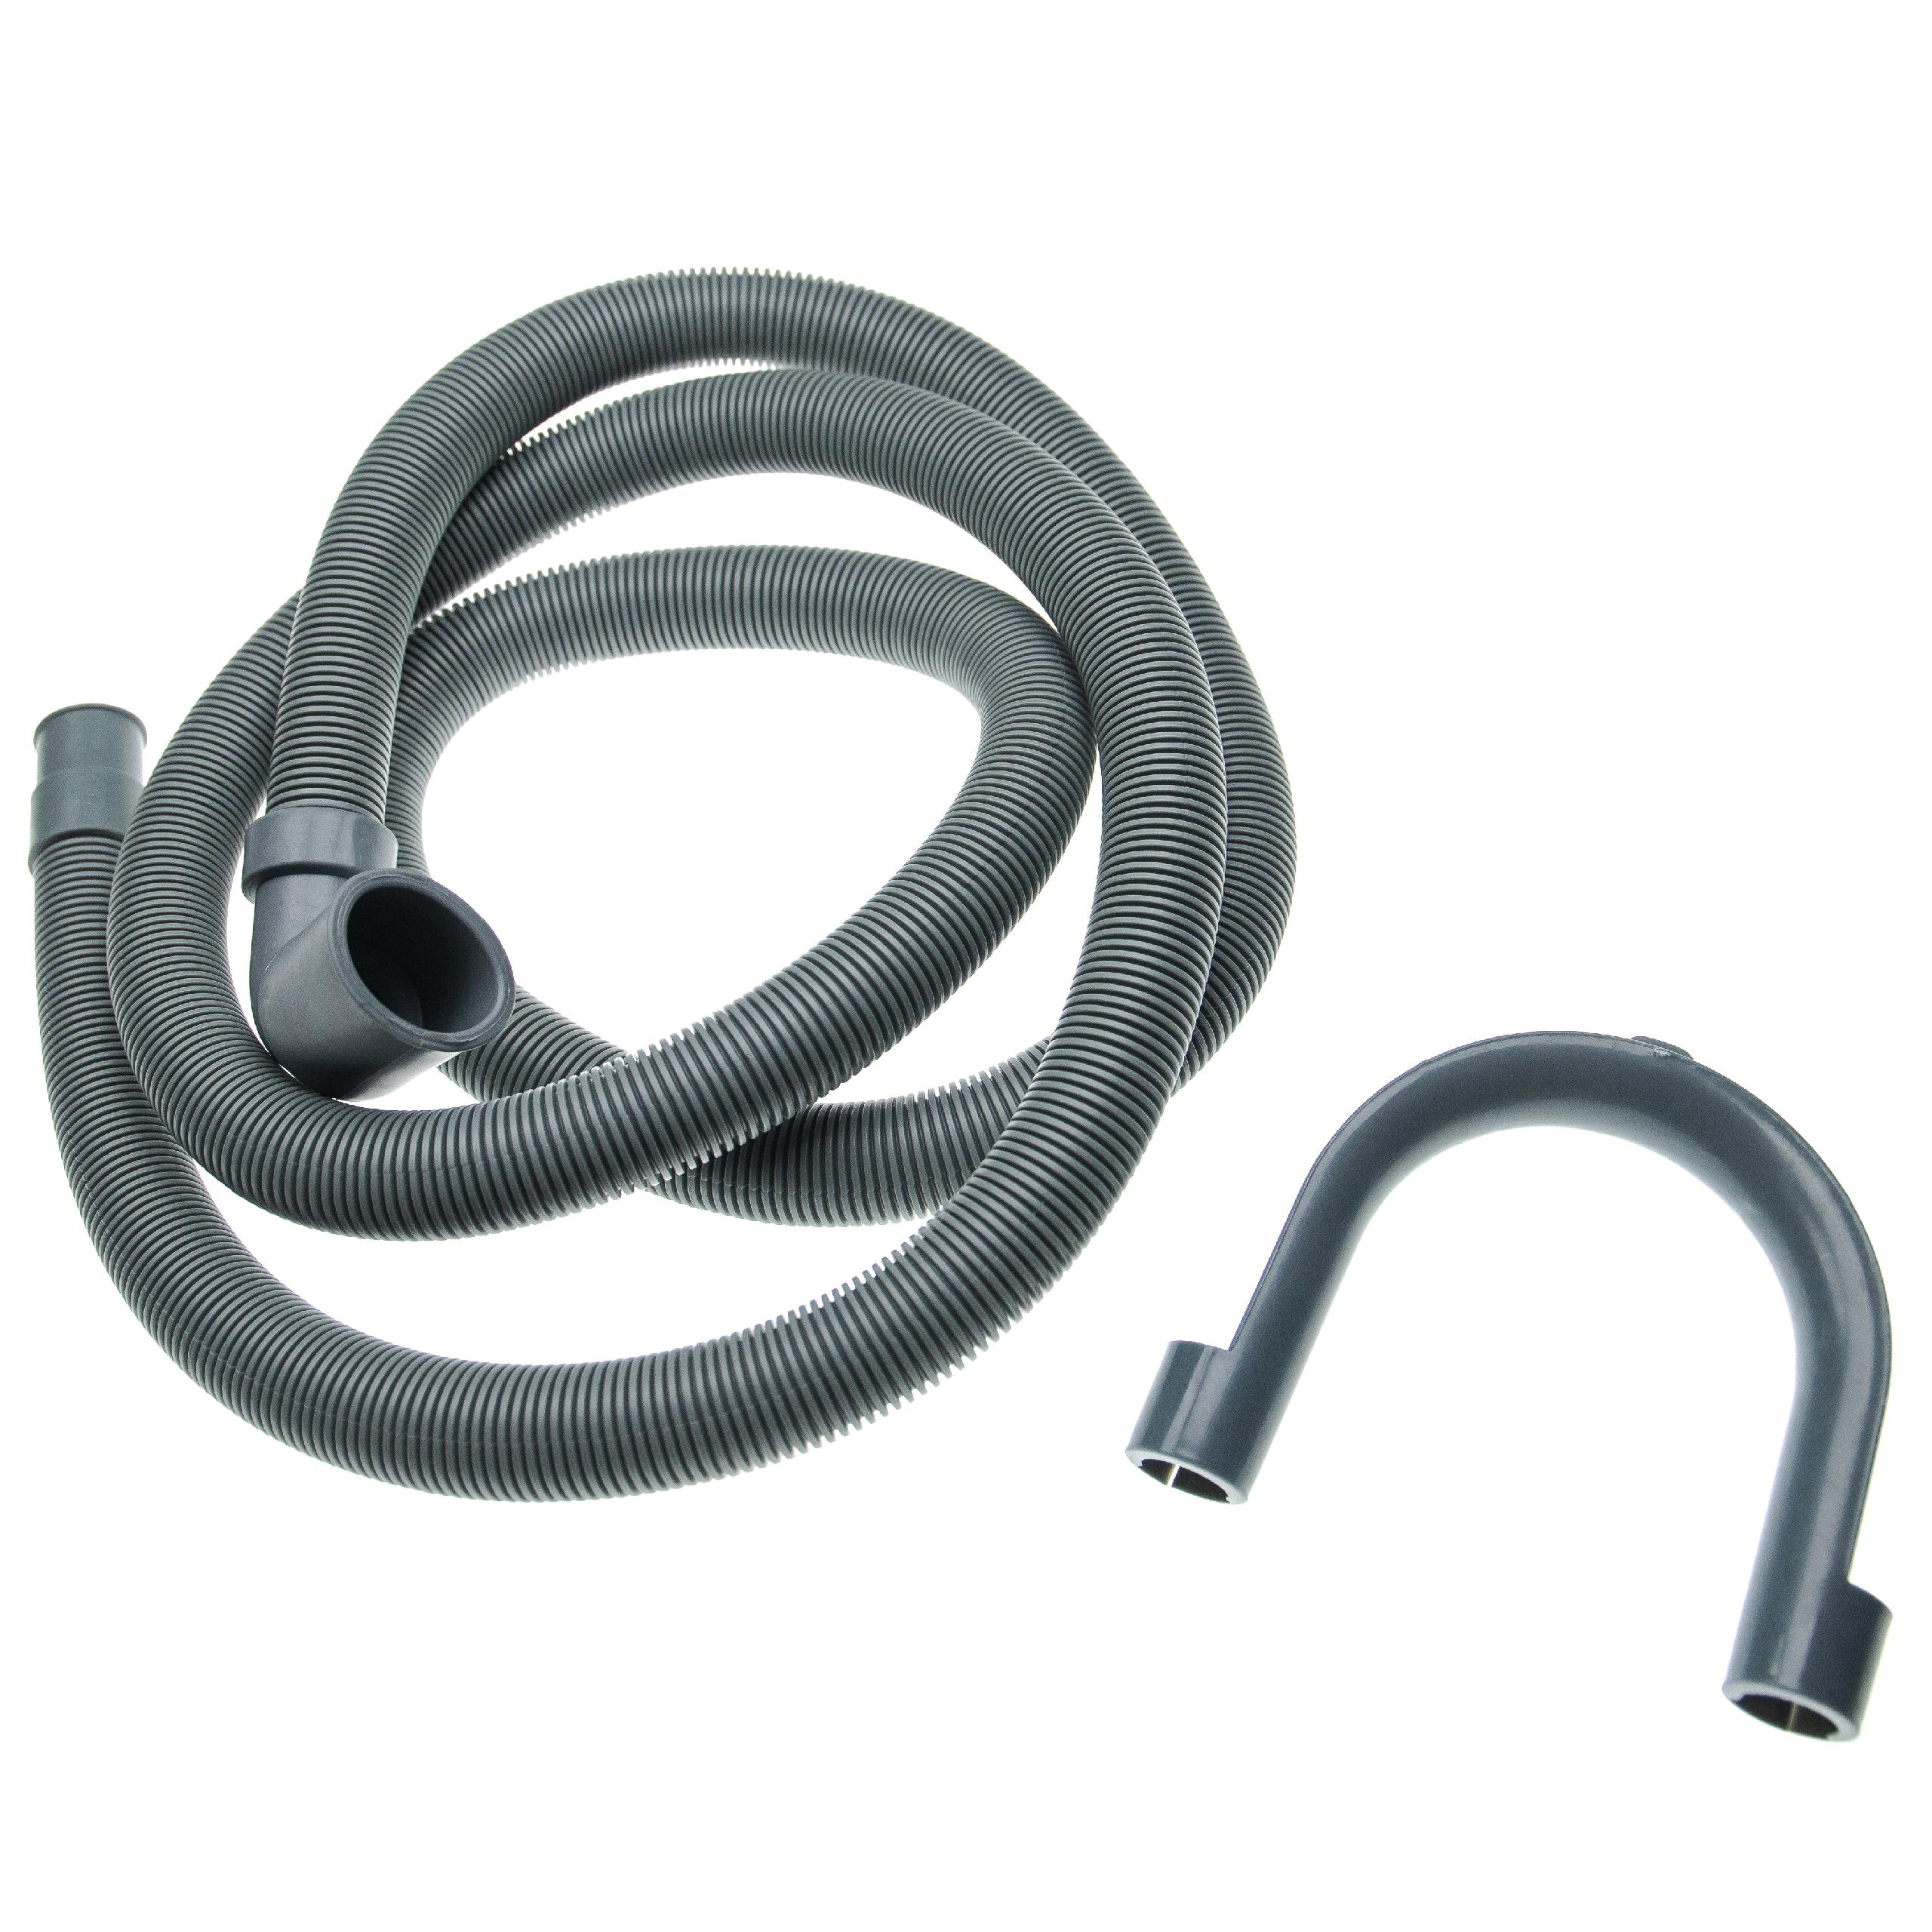 Drain Hose compatible with most Washing Machines - 22/29mm Right Angle Connection, Grey